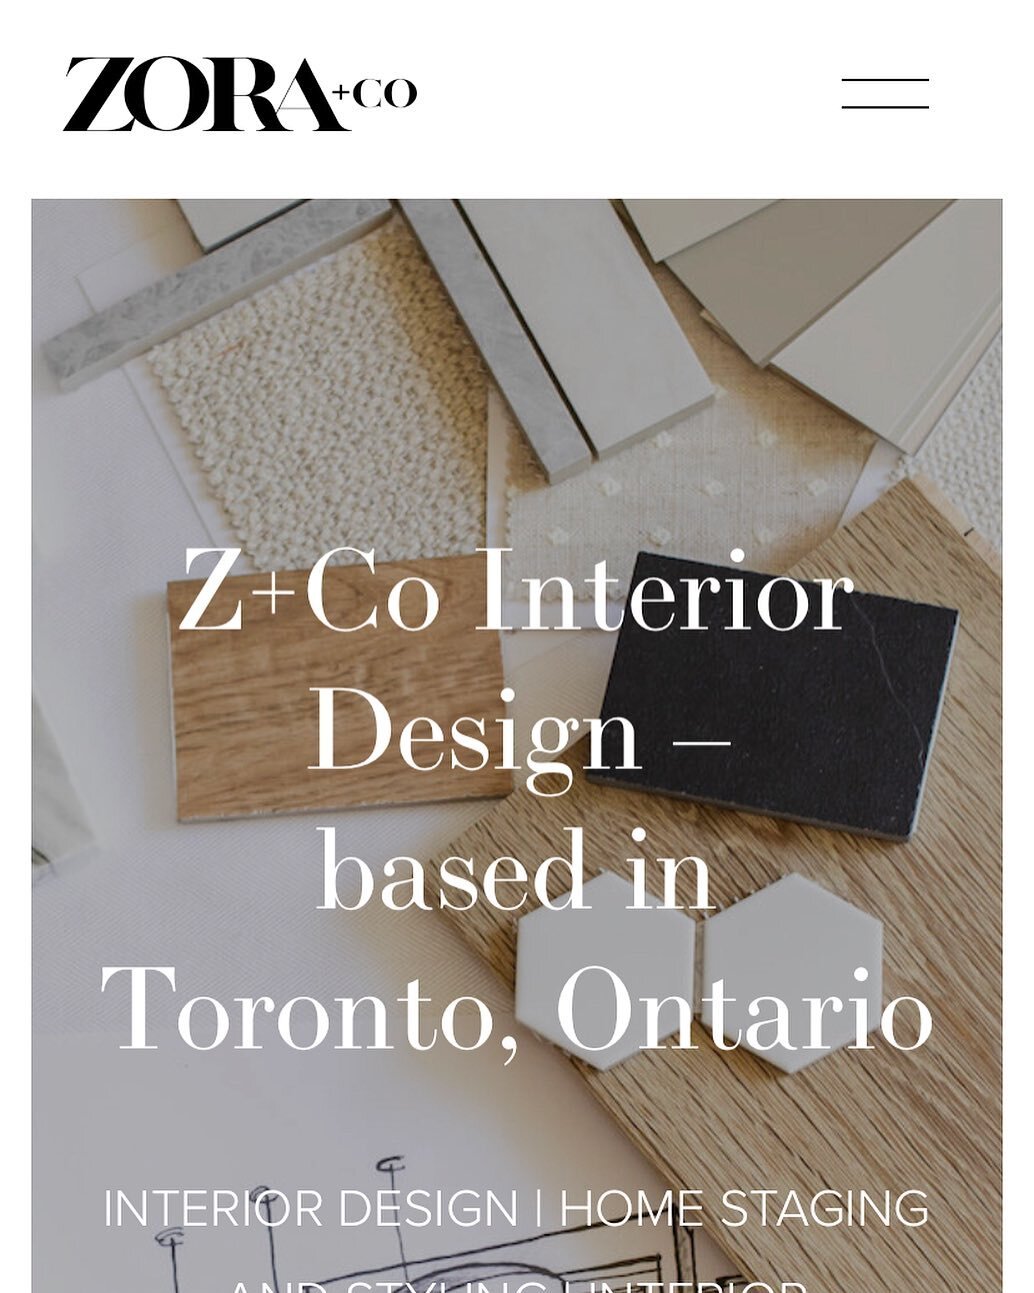 I am so excited to announce the launch of my new website !! www.zoraandcodesign.com  Web: @kiwibcreative  @copythatinspires @simplycurateco @skndeep.ca